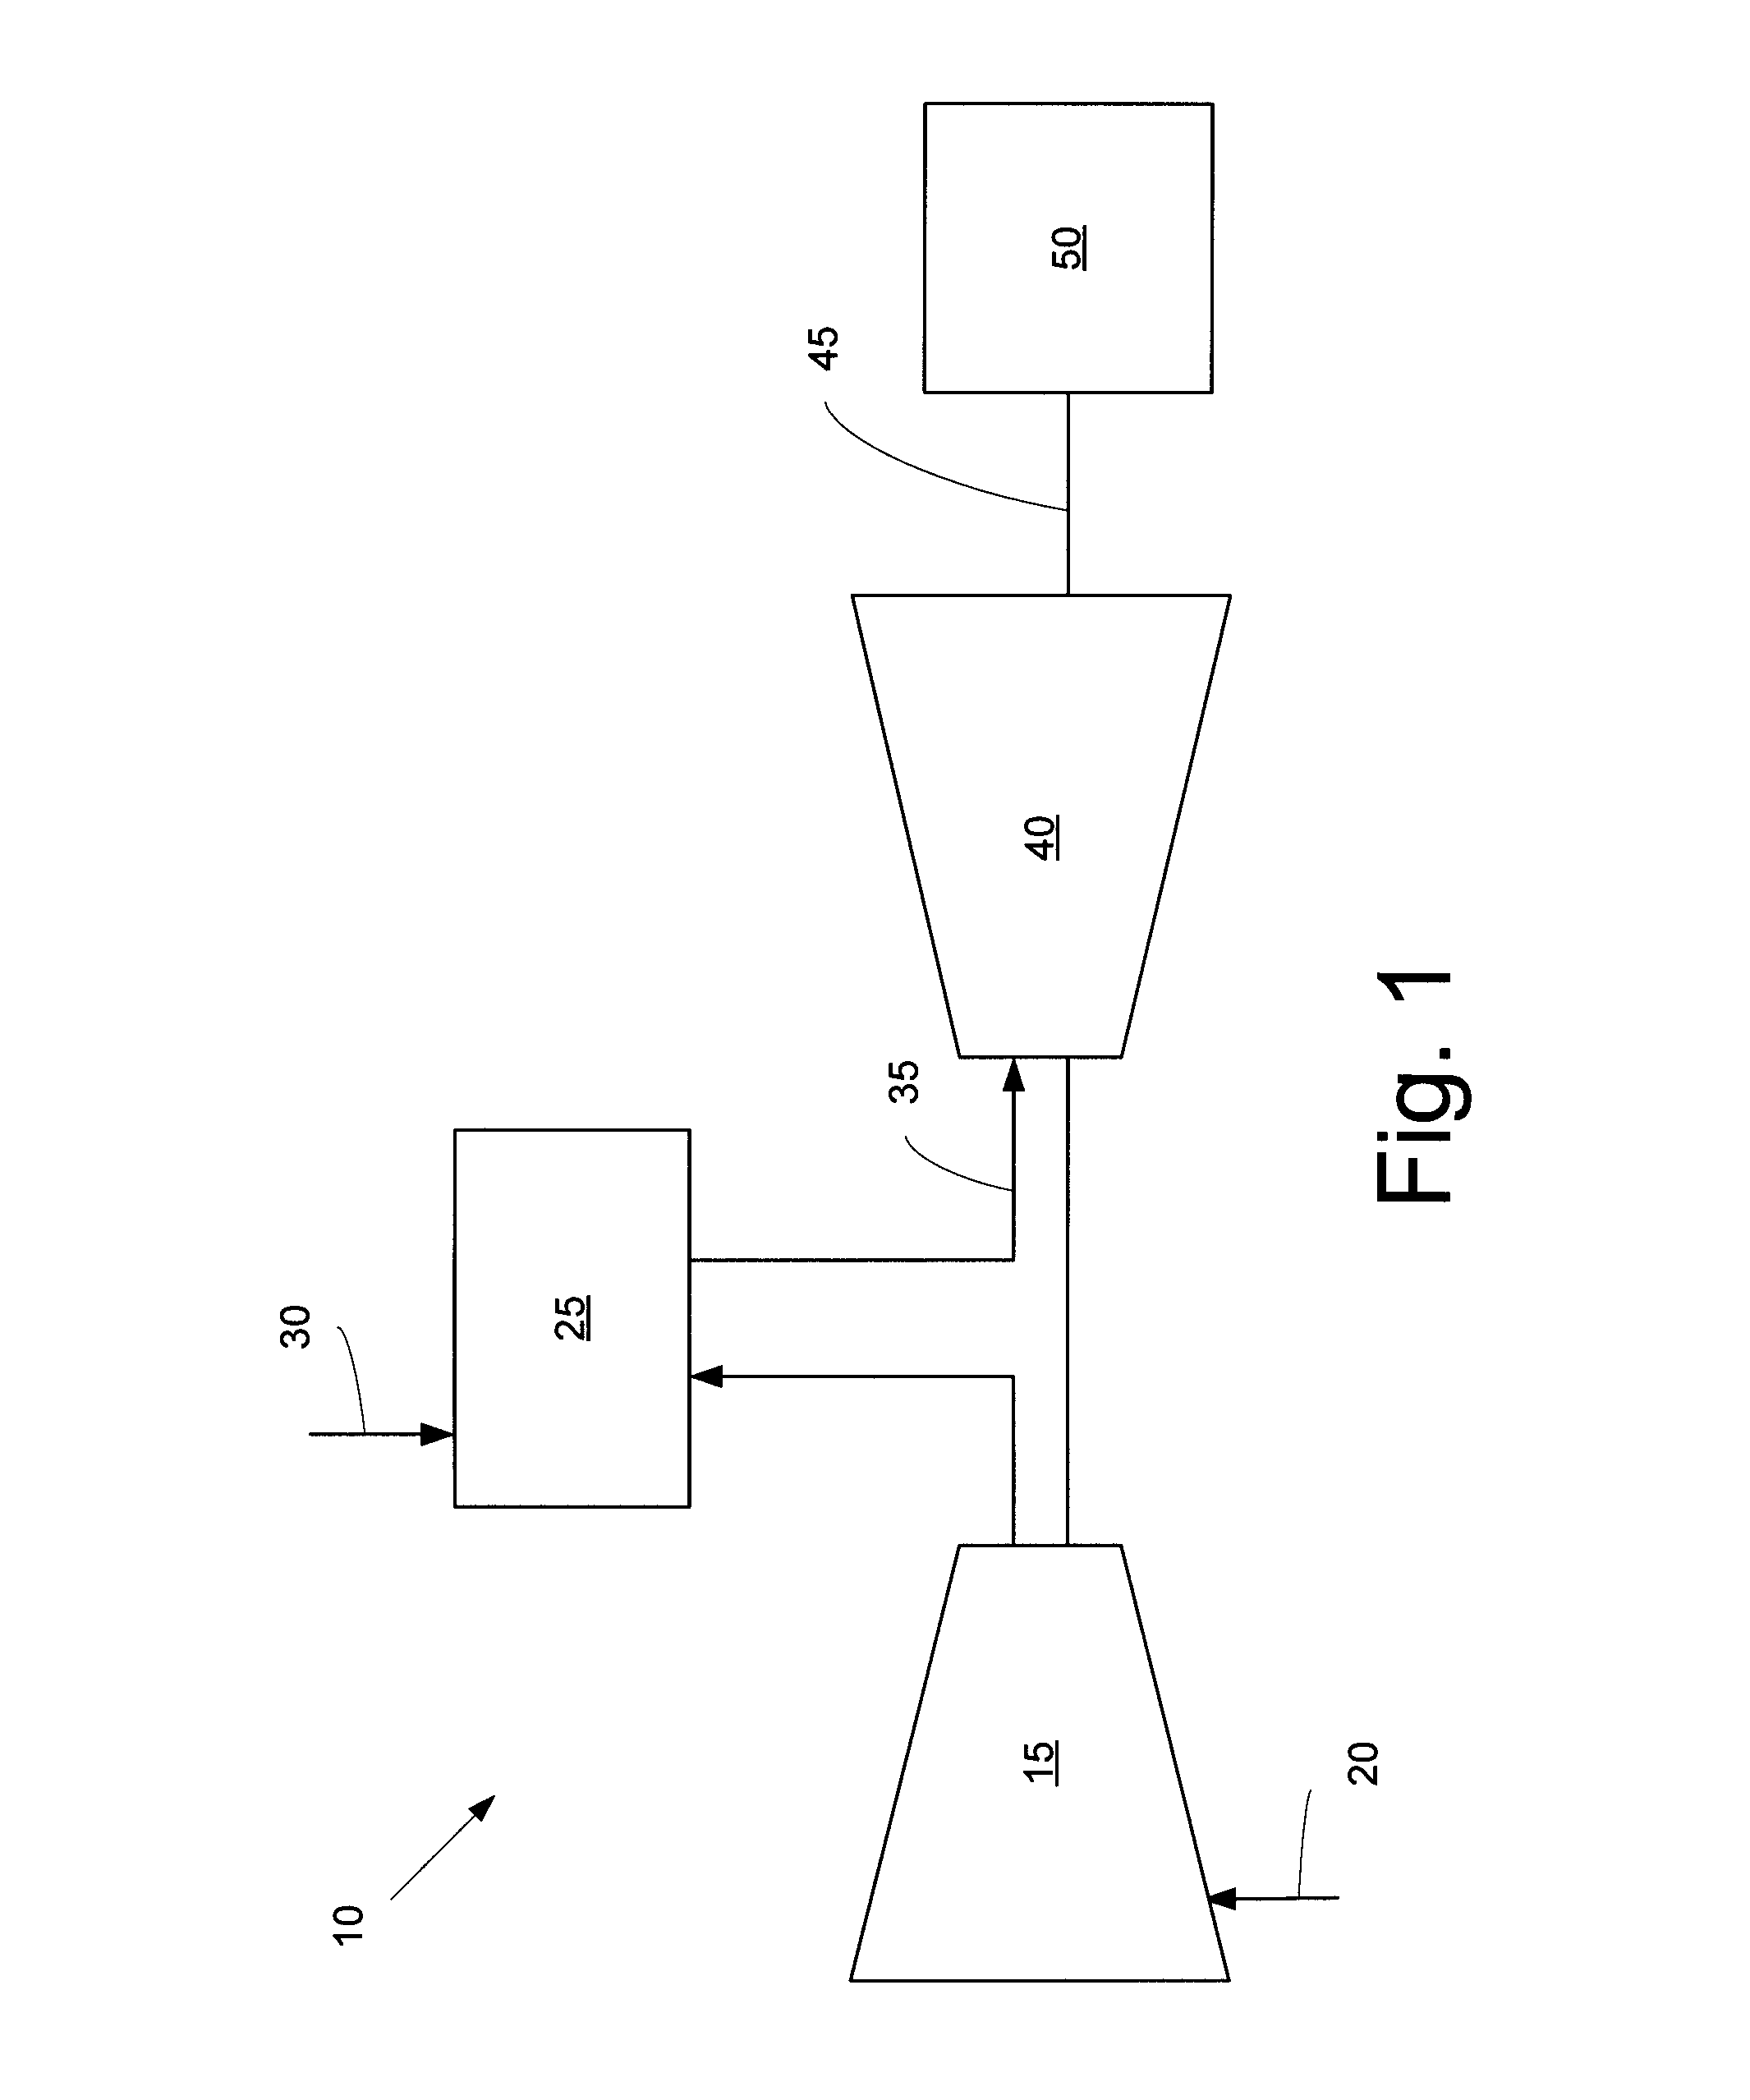 Gas turbine engine with integrated bottoming cycle system